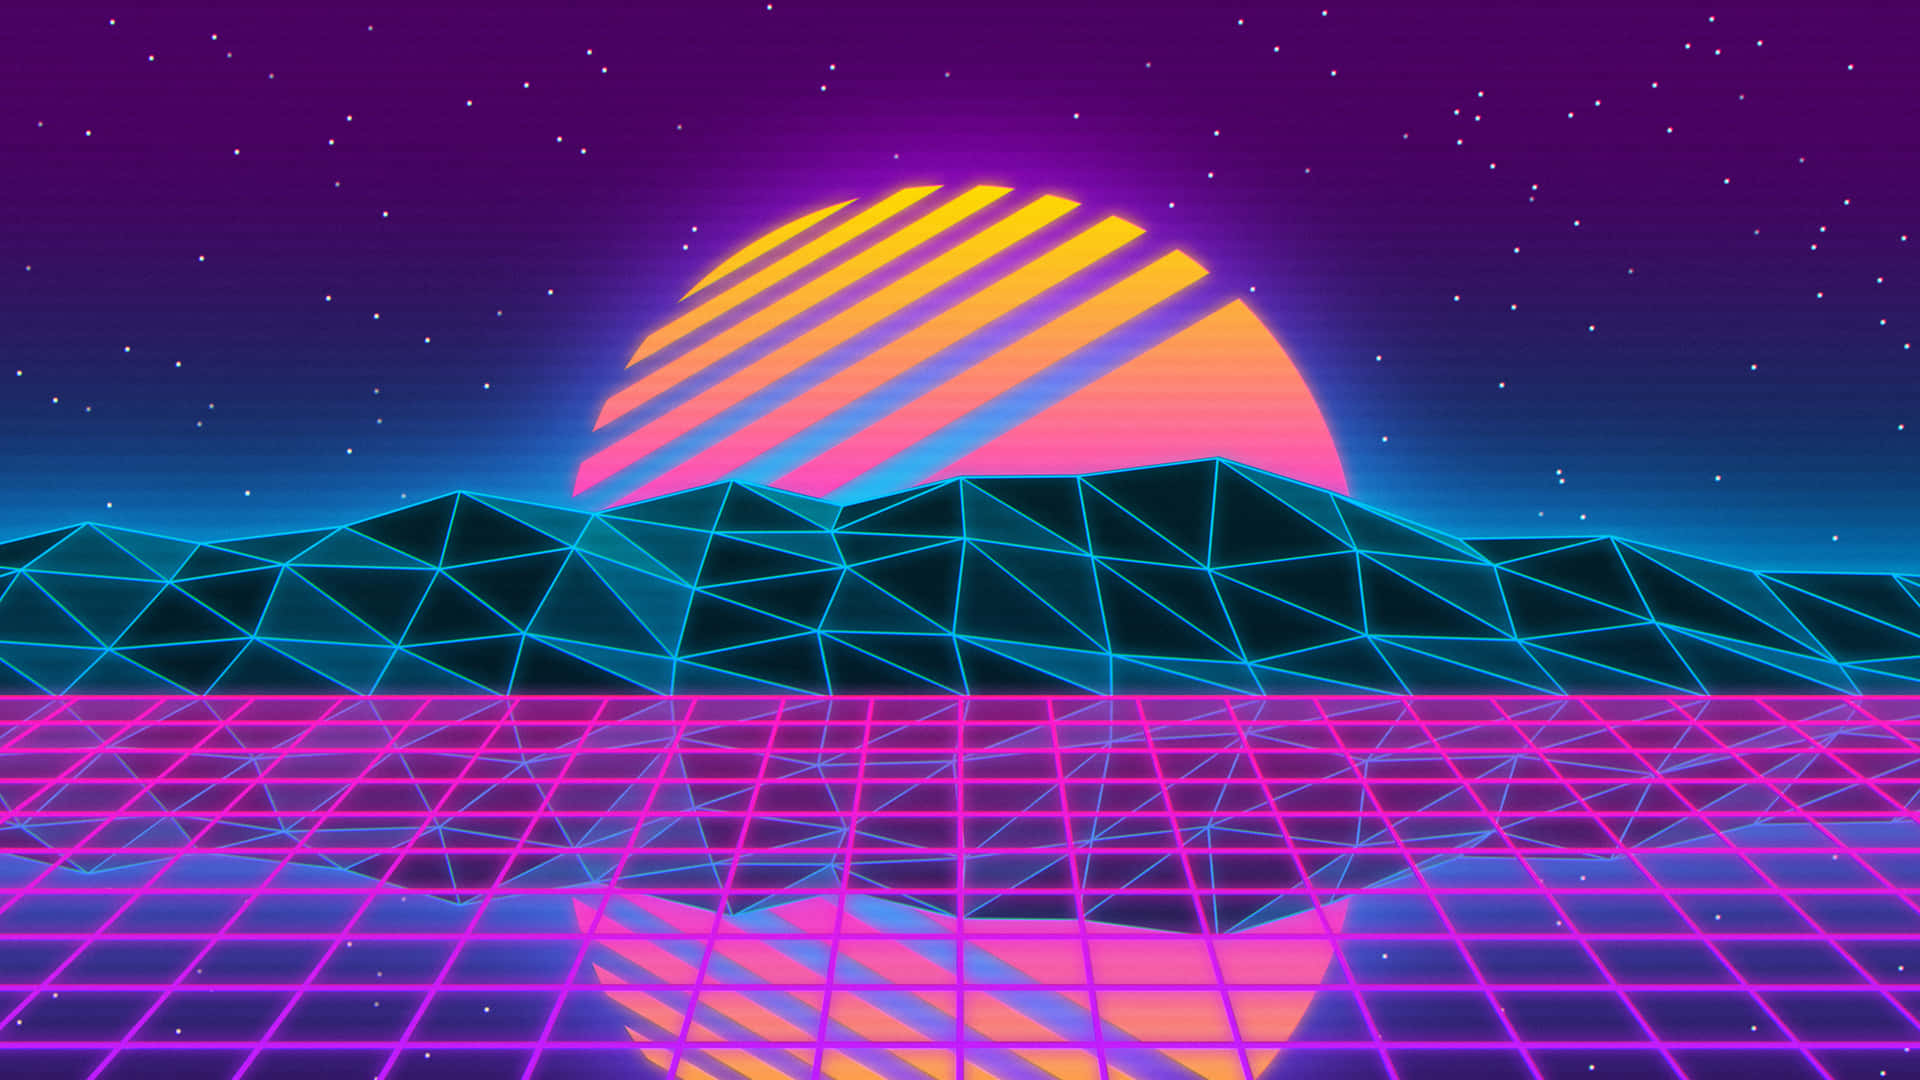 The beauty of the vaporwave aesthetic